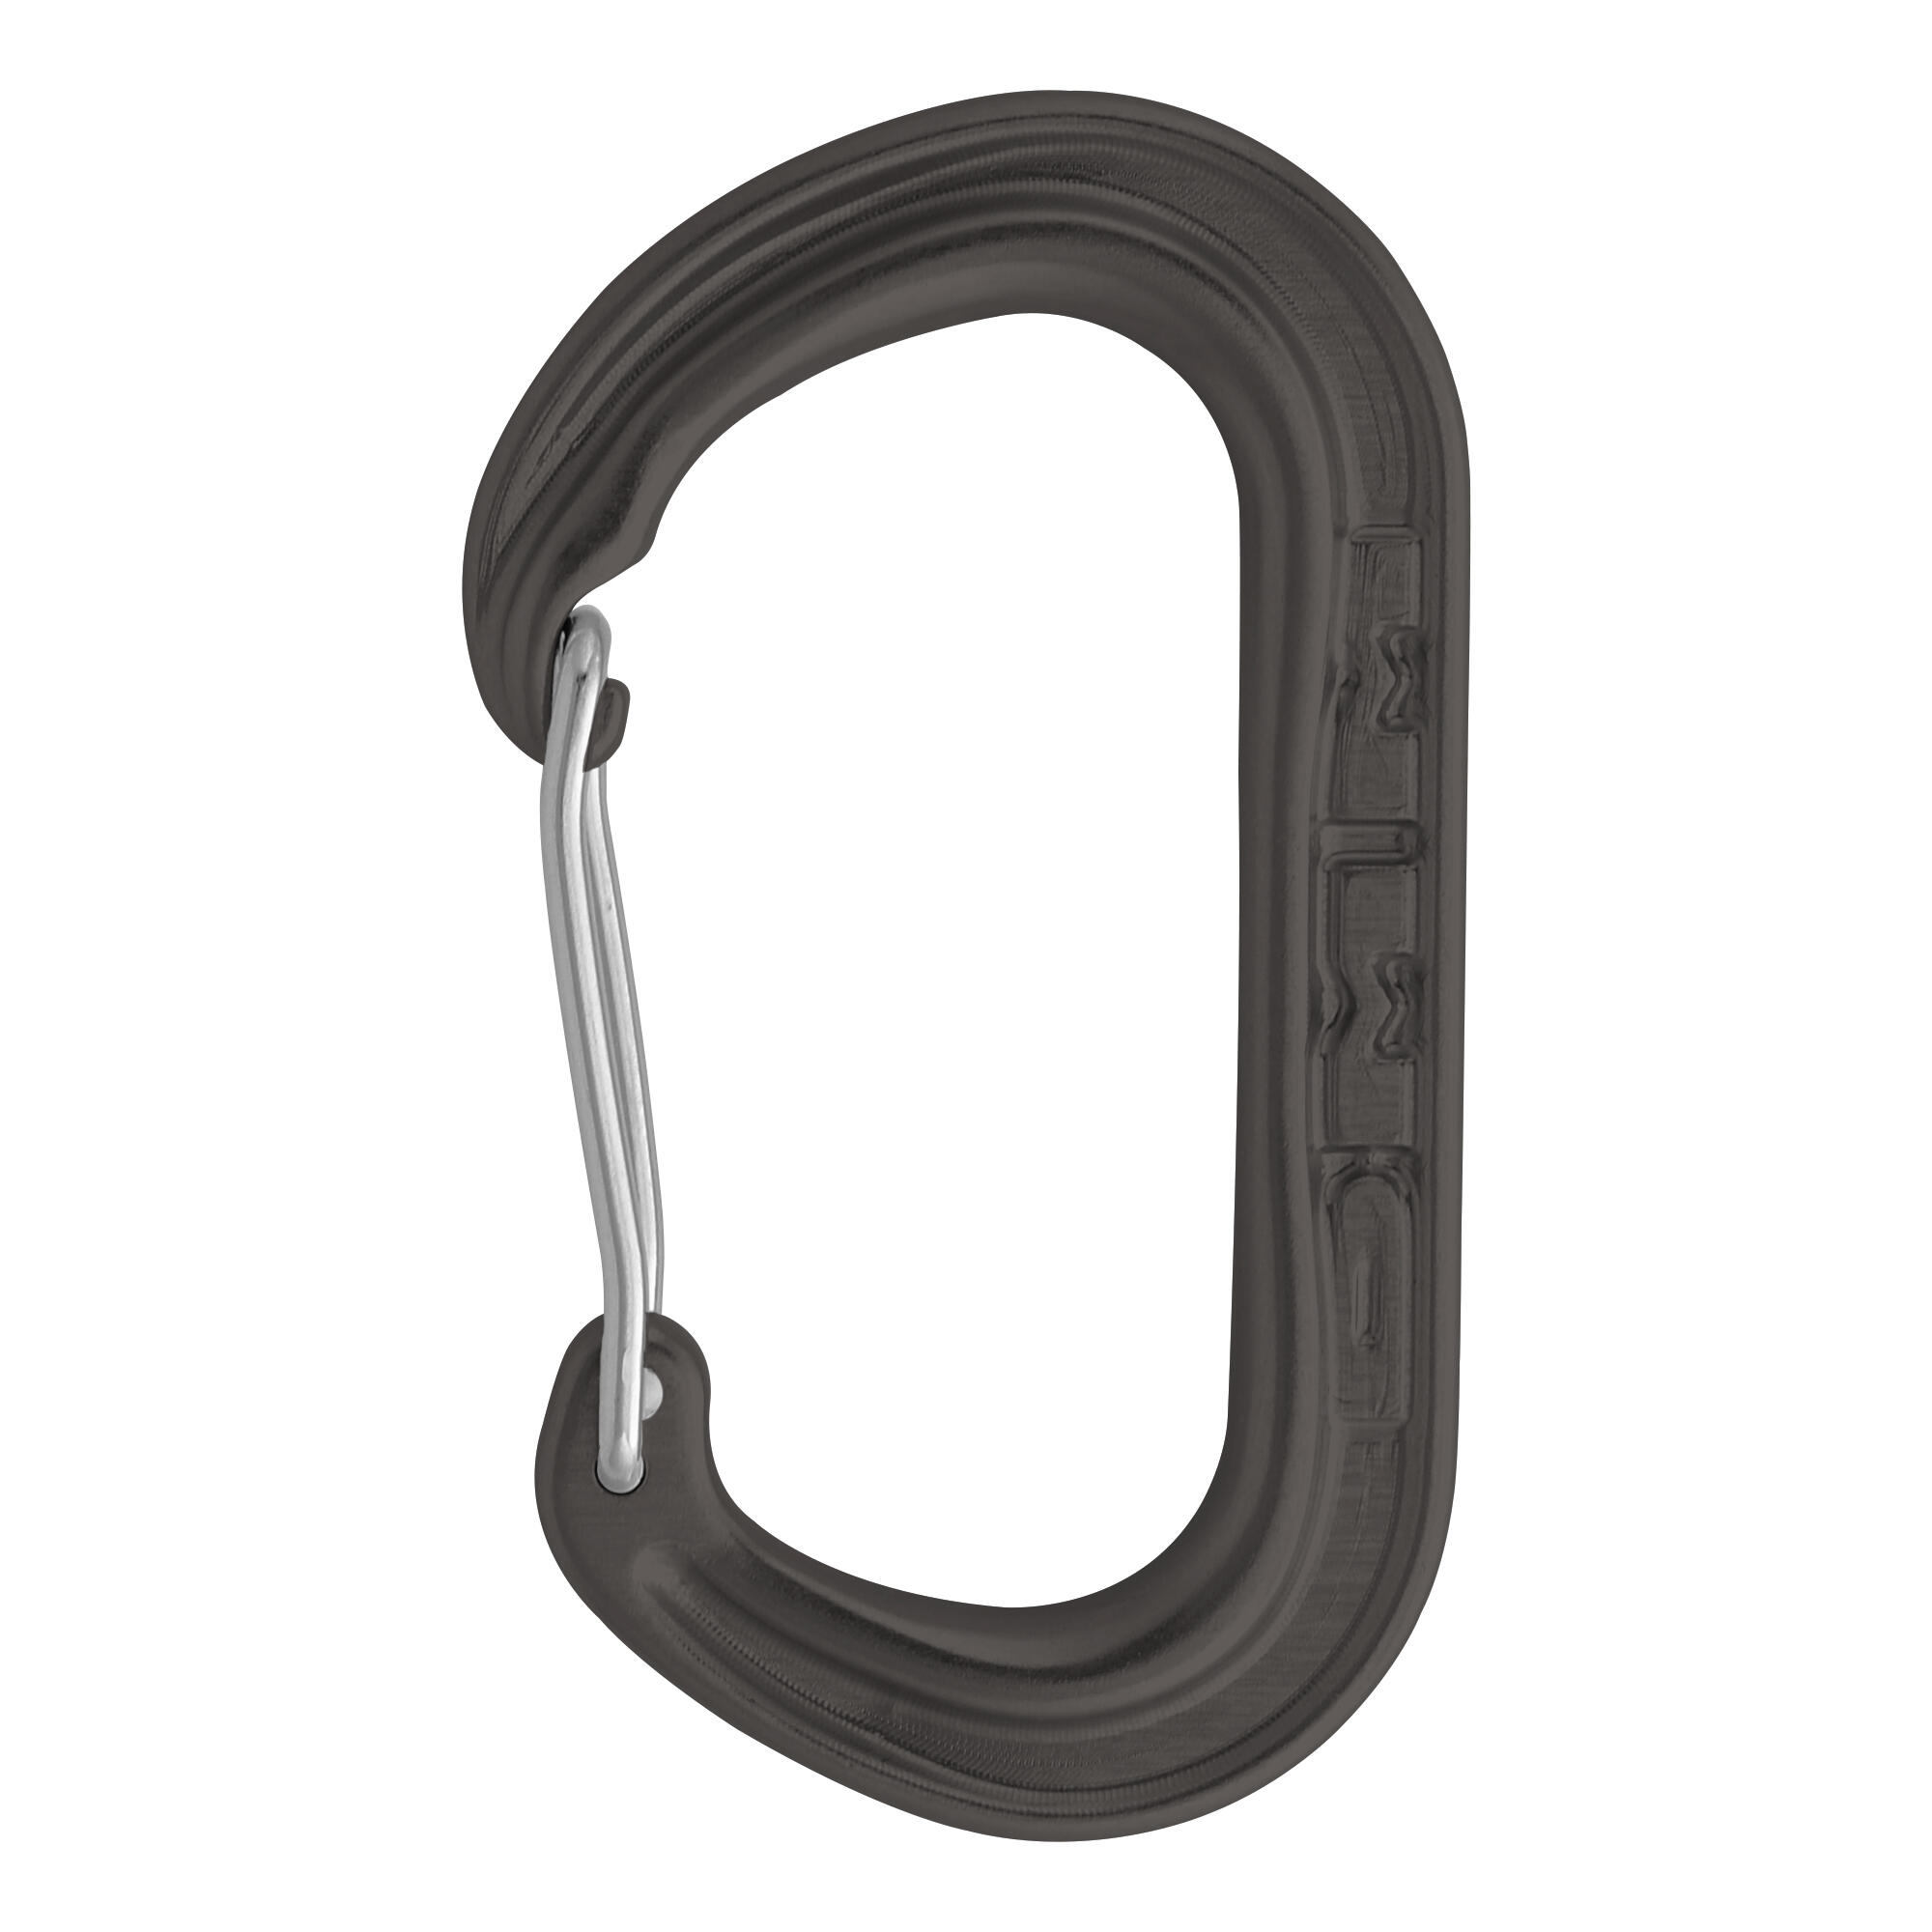 DMM XSRE Wire Accessory Carabiner - Grey